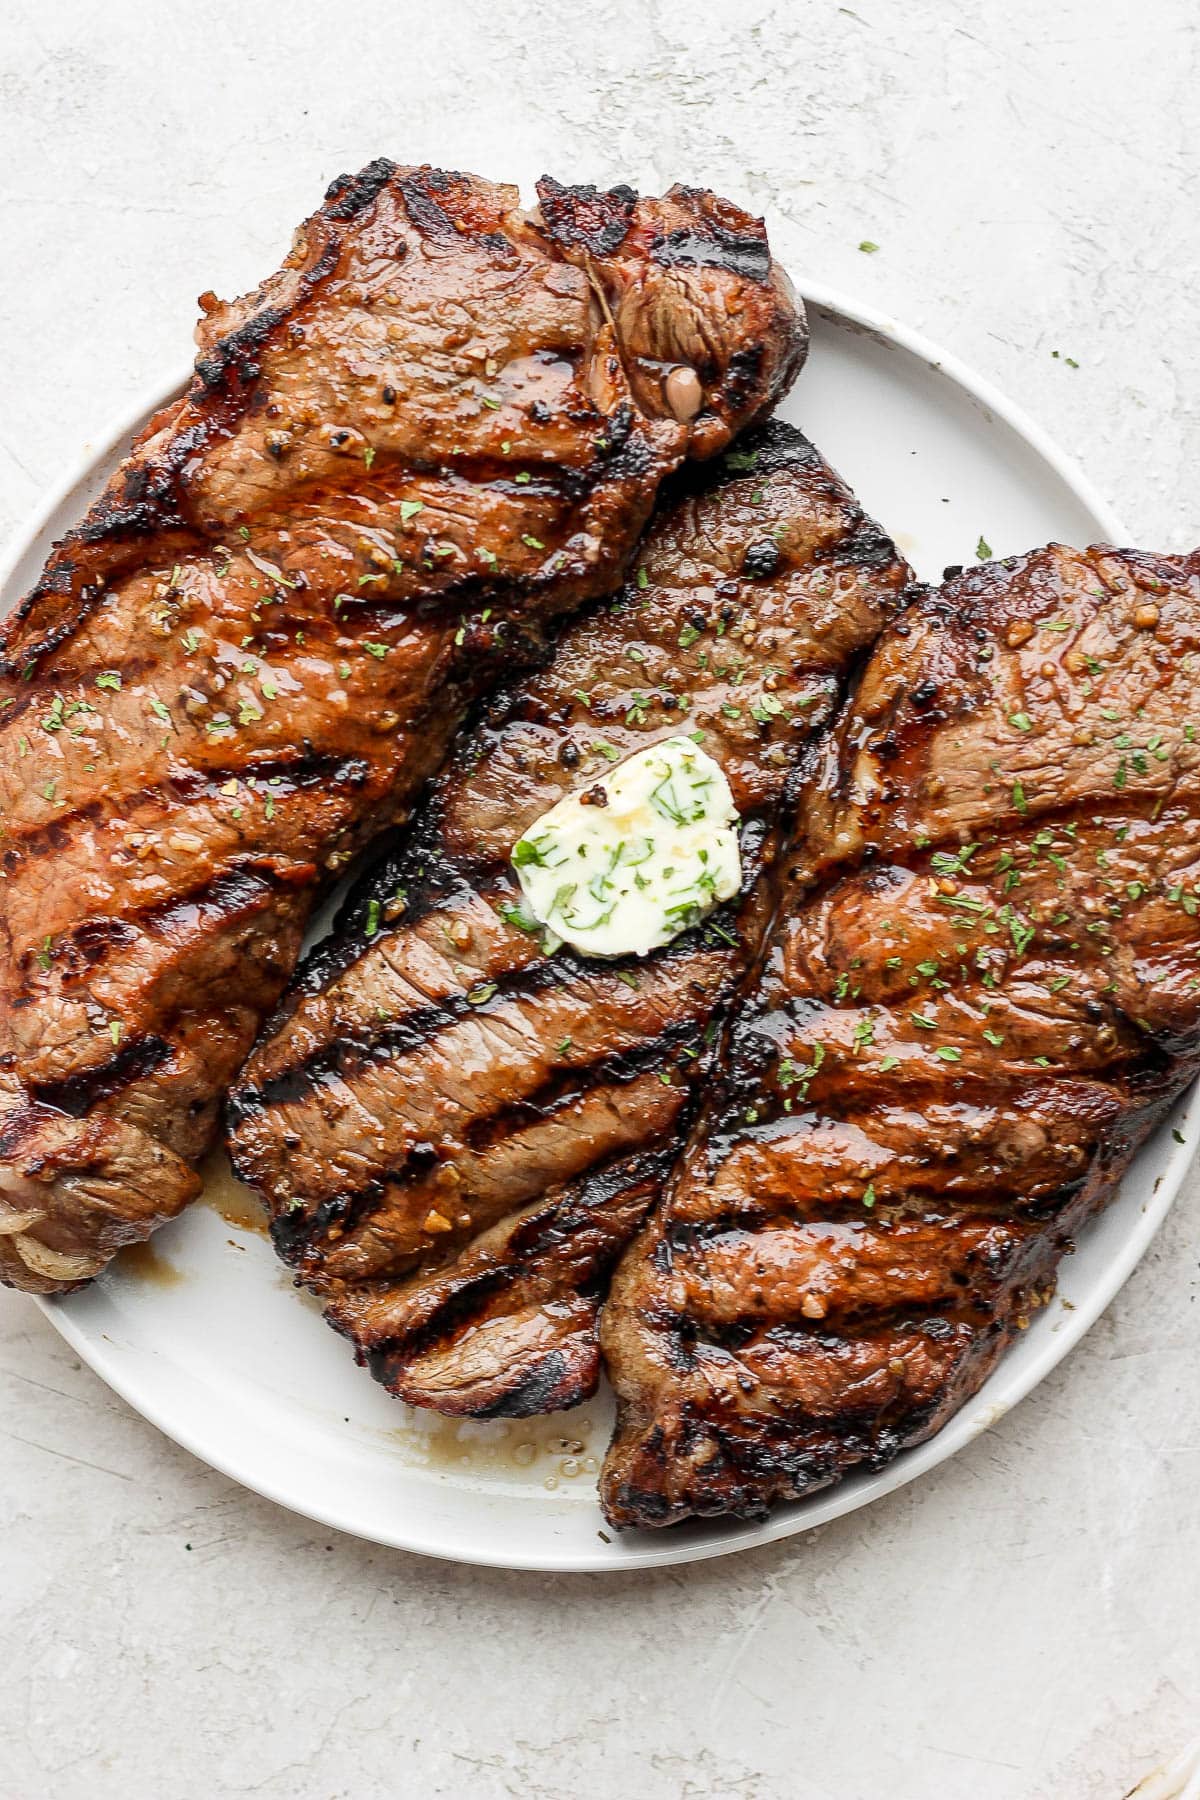 How to Grill a Perfect Steak - The Wooden Skillet